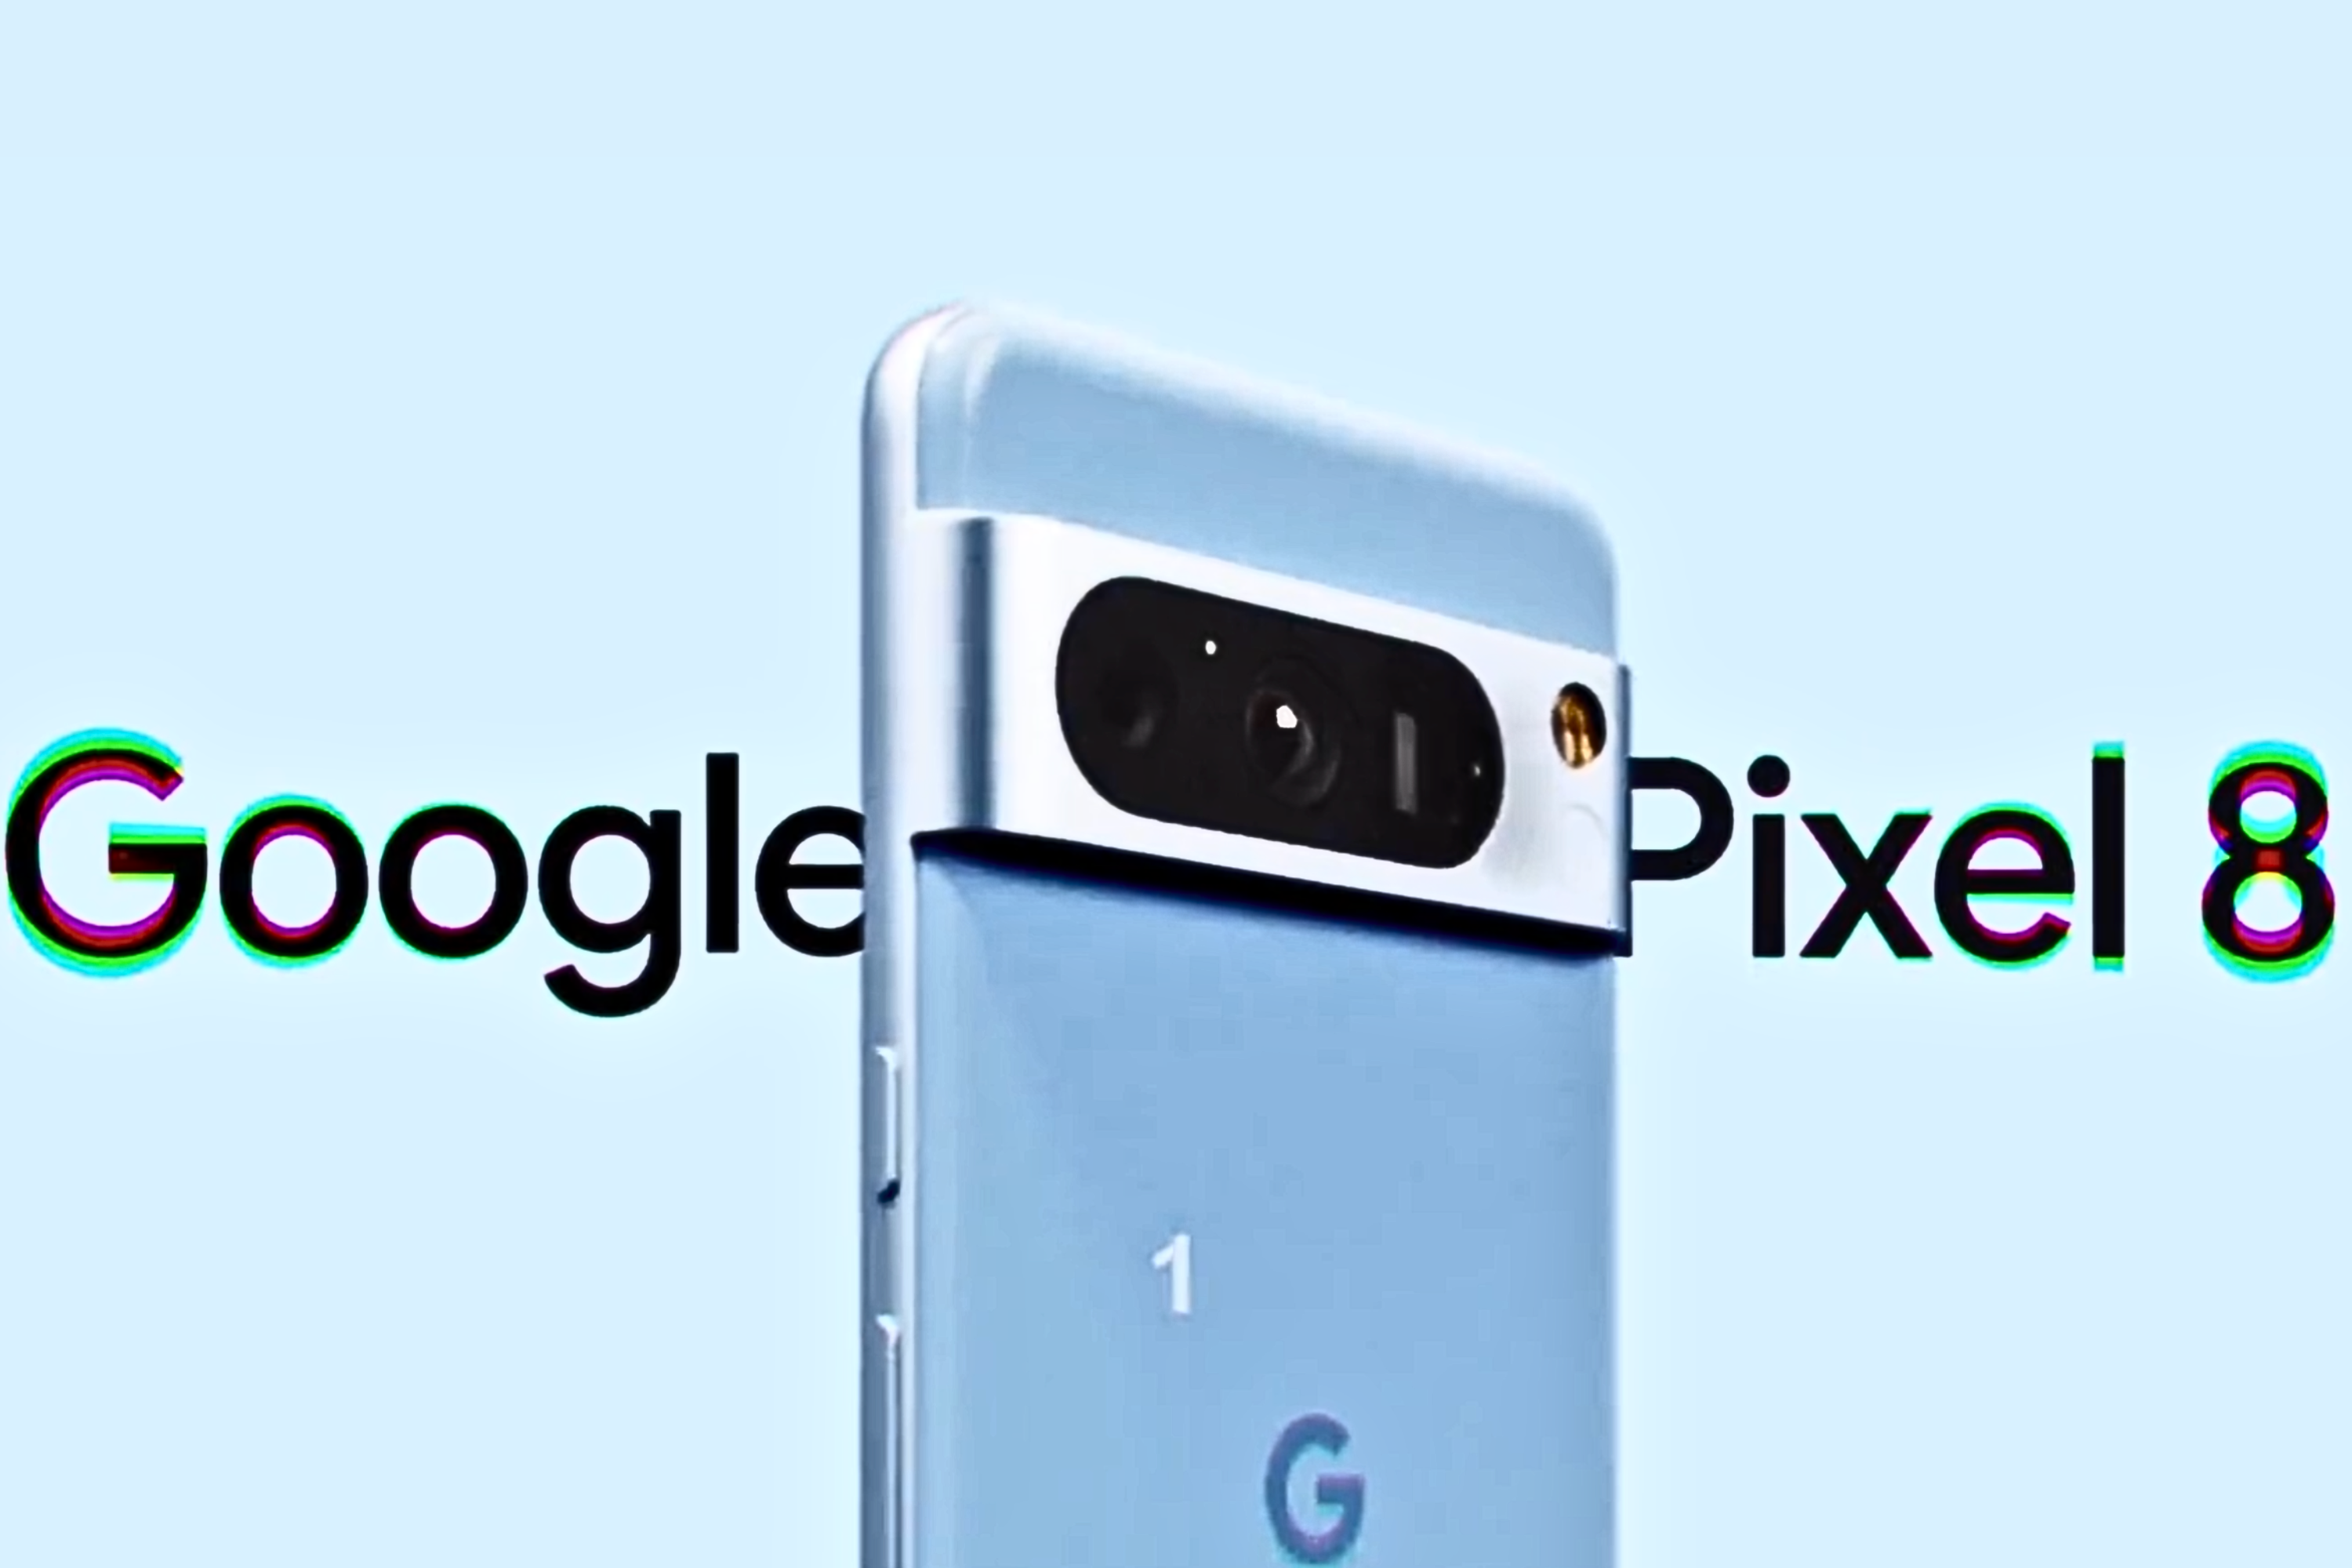 Google Pixel 8 leaked promo image showing off new phone in blue color